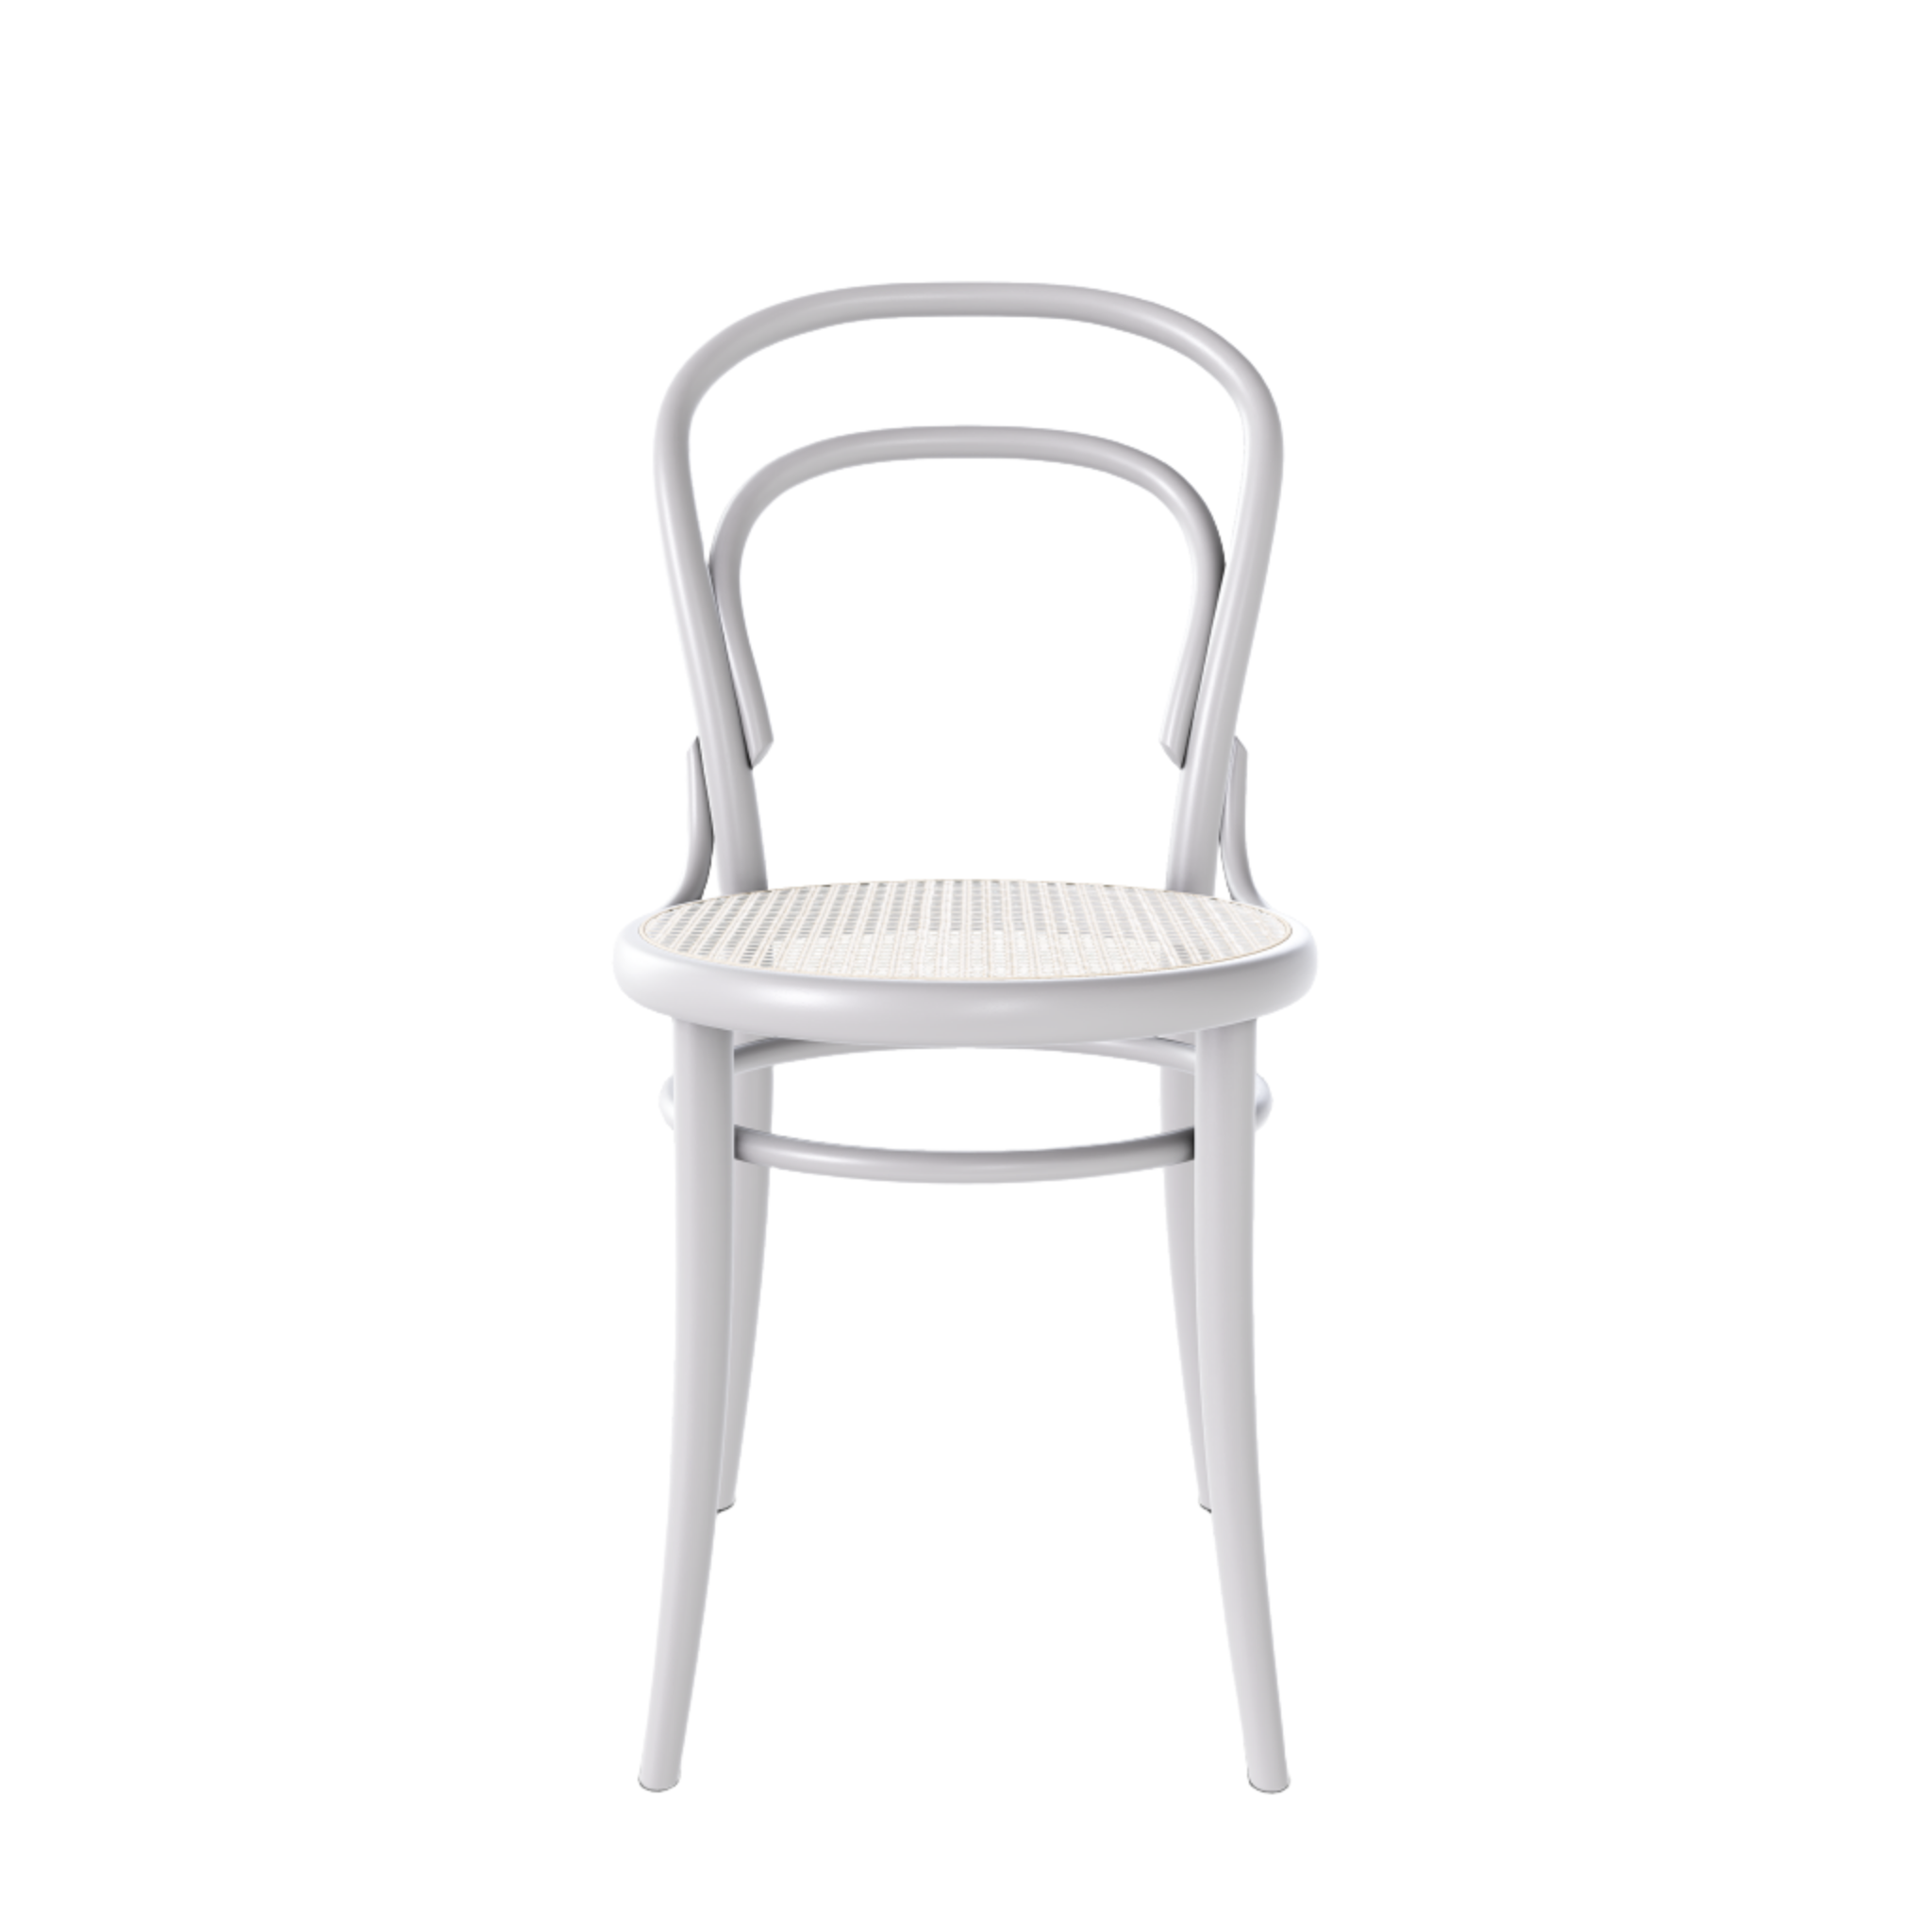 Ton 14 Dining Chair with cane seat in cloud grey